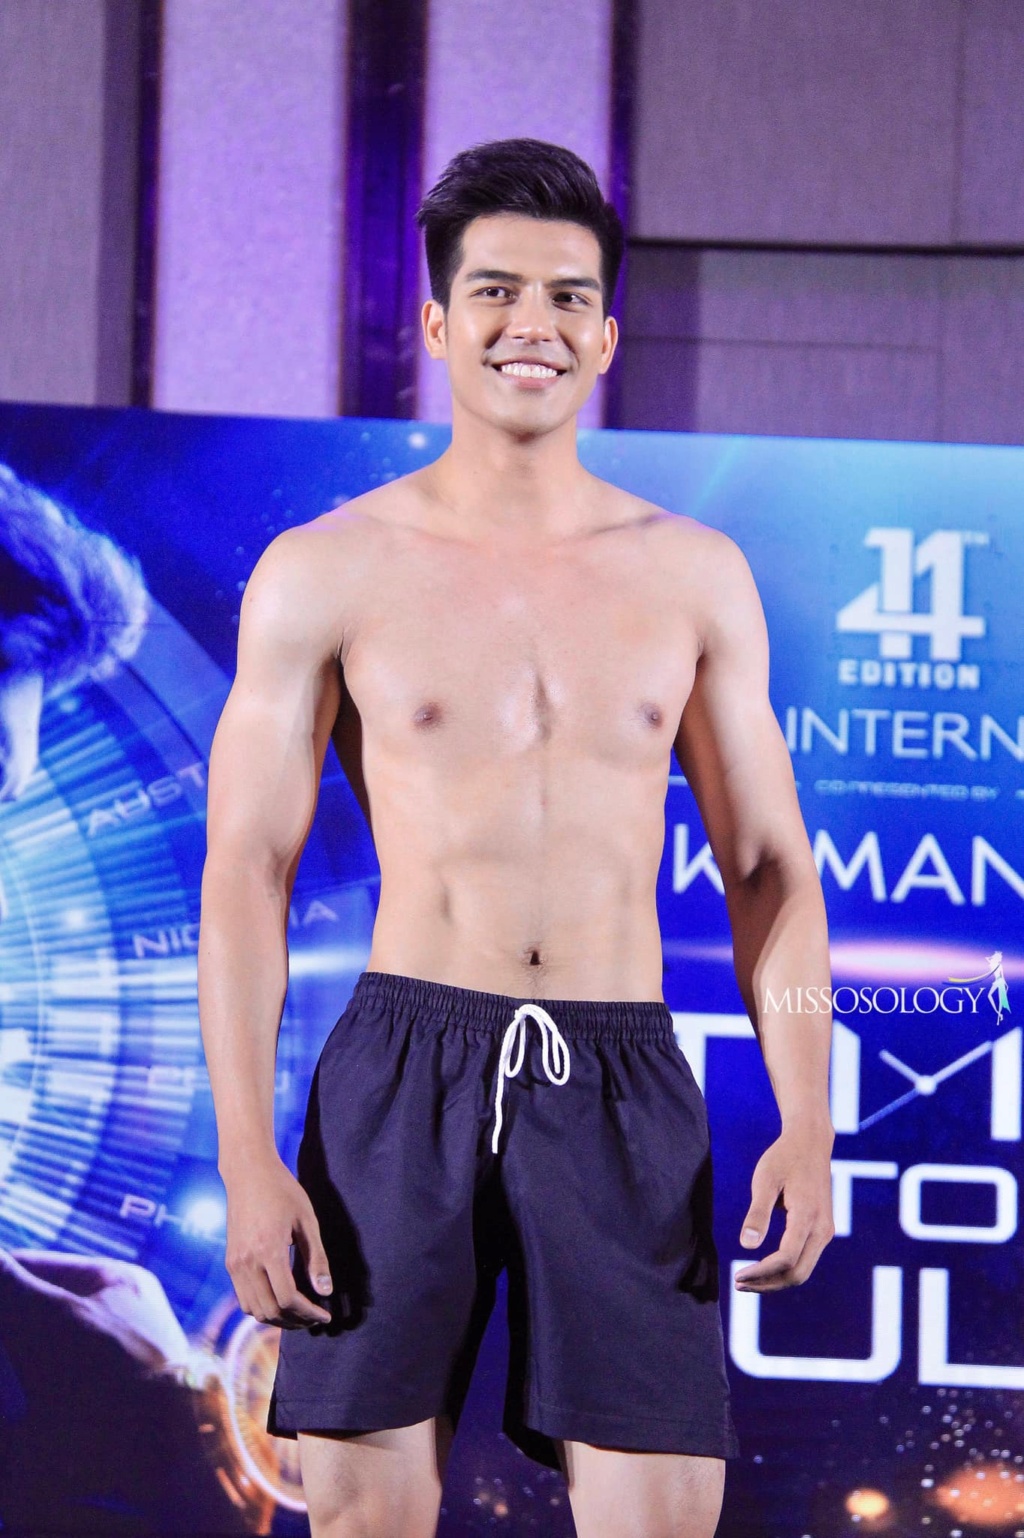 14th Mister International in Manila, Philippines - Oct 30th, 2022 - Winner is Dominican Republic 31260110